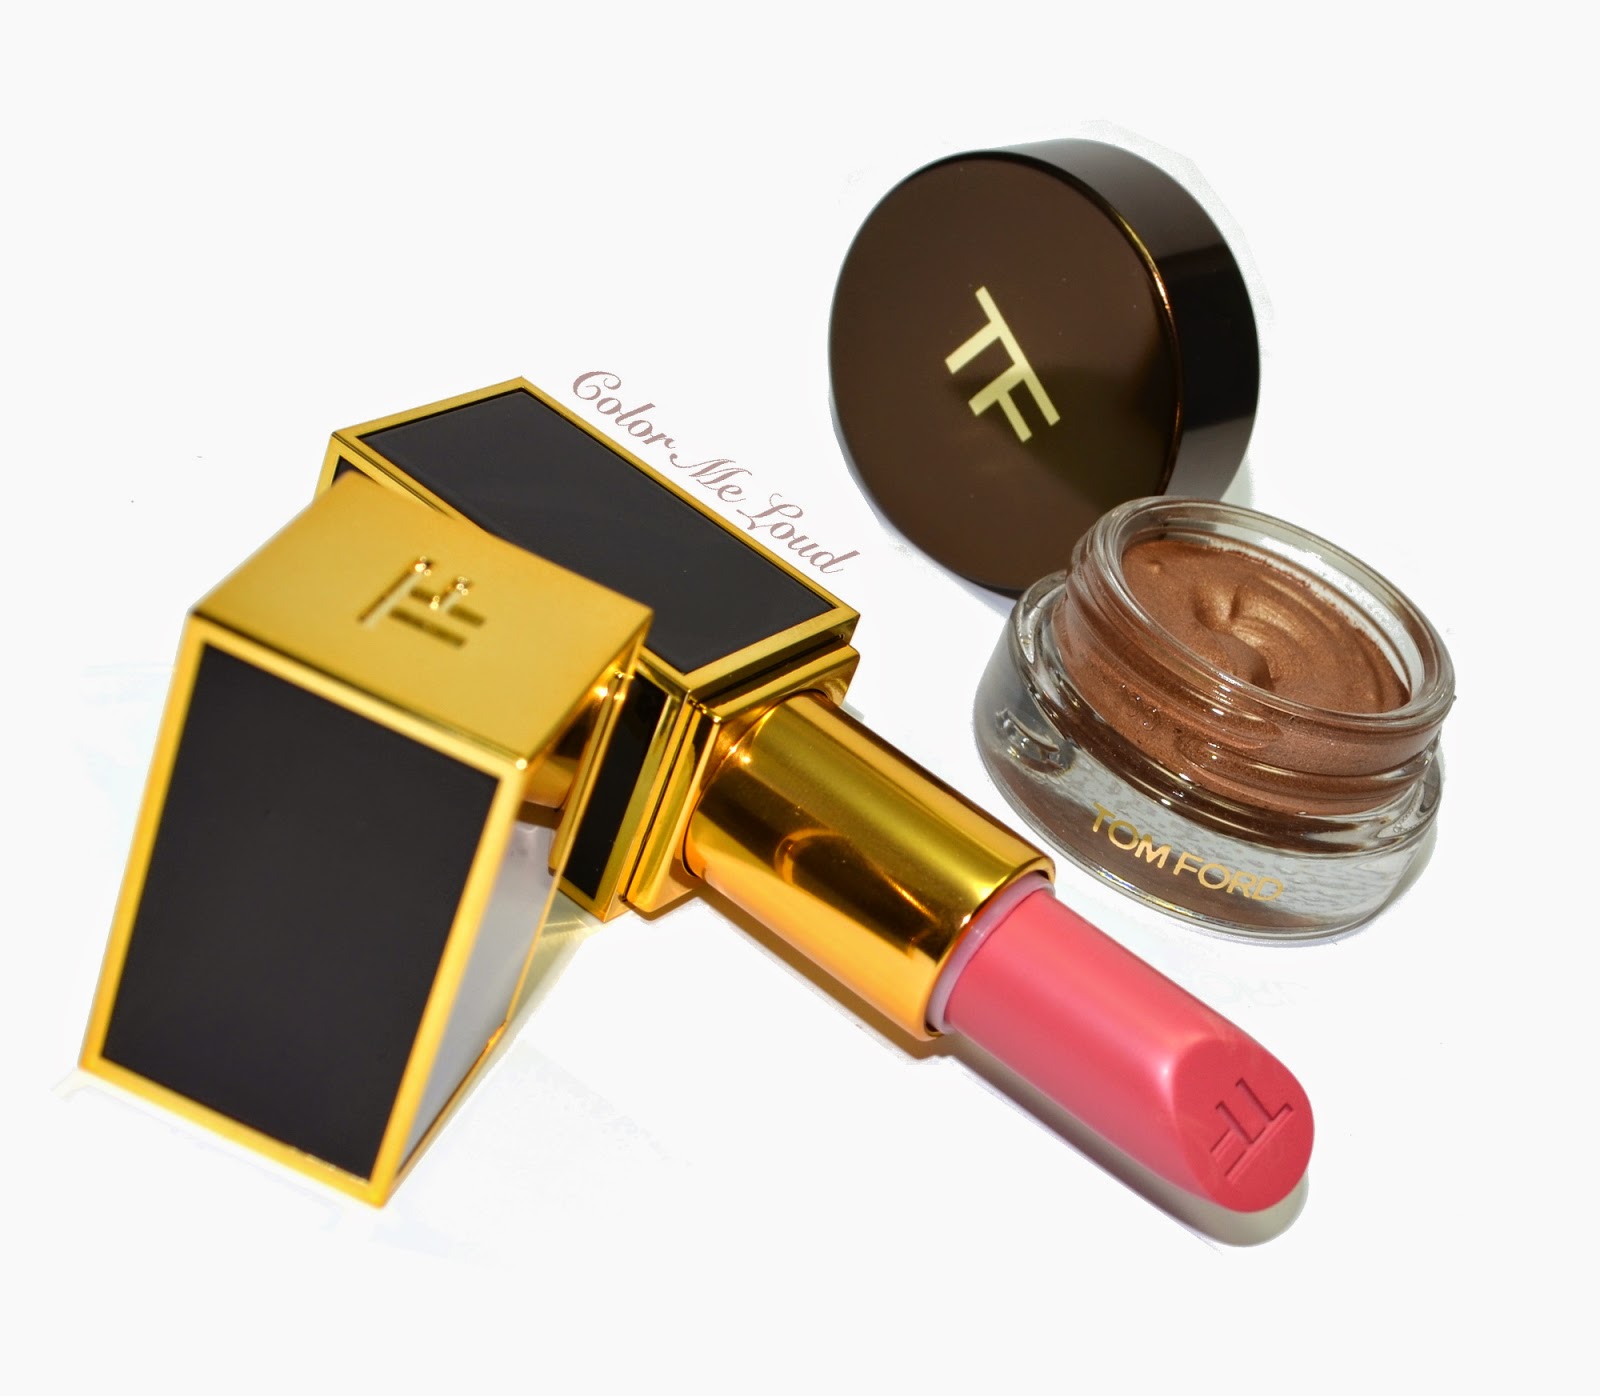 Tom Ford Lip Color Matte in Pink Tease and Cream Color For Eyes in Platinum for Holiday 2014 Collection, Review, Swatch, Comparison & FOTD